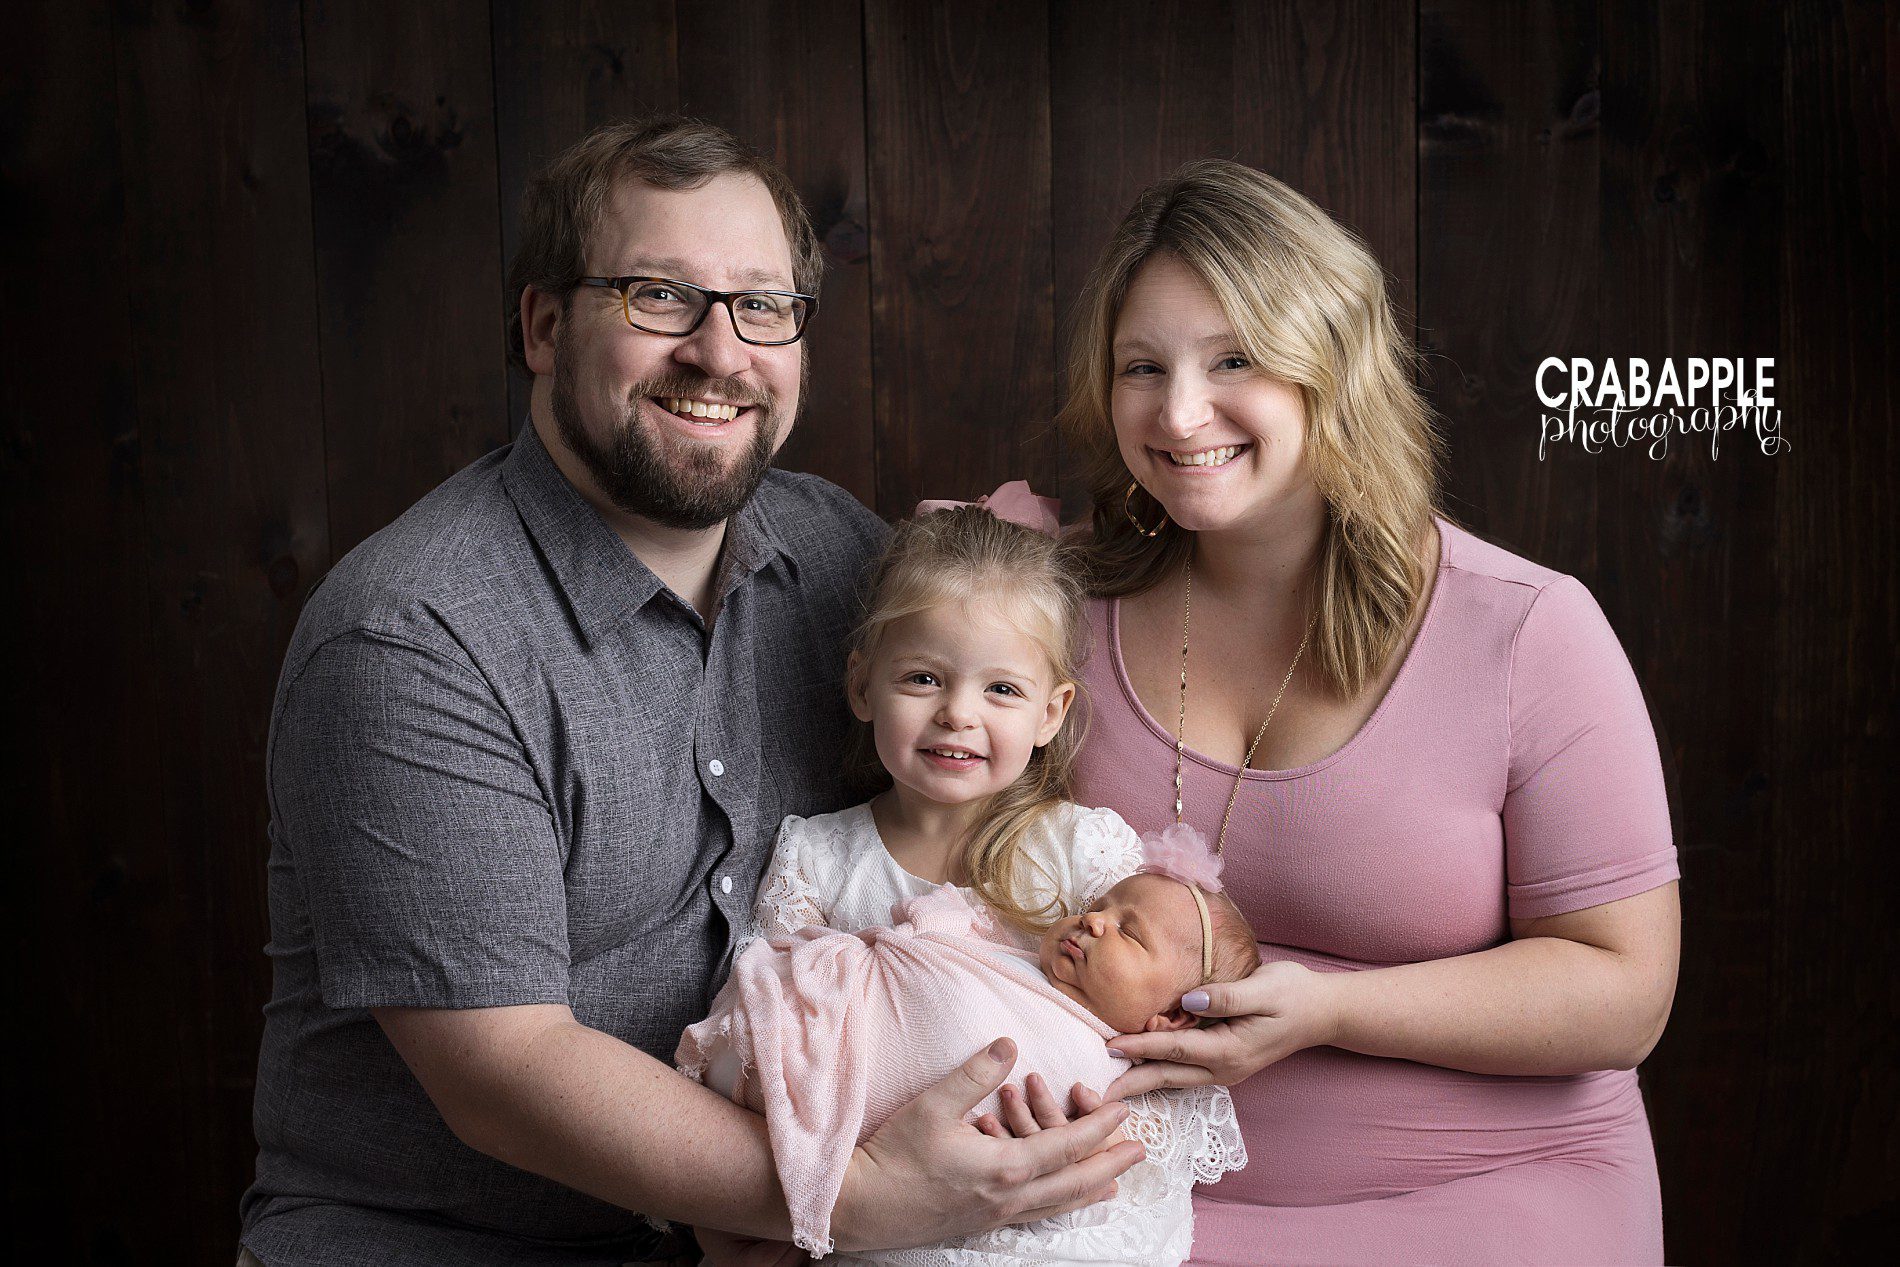 Family of four photos, mom, dad, toddler sister and newborn baby sister.